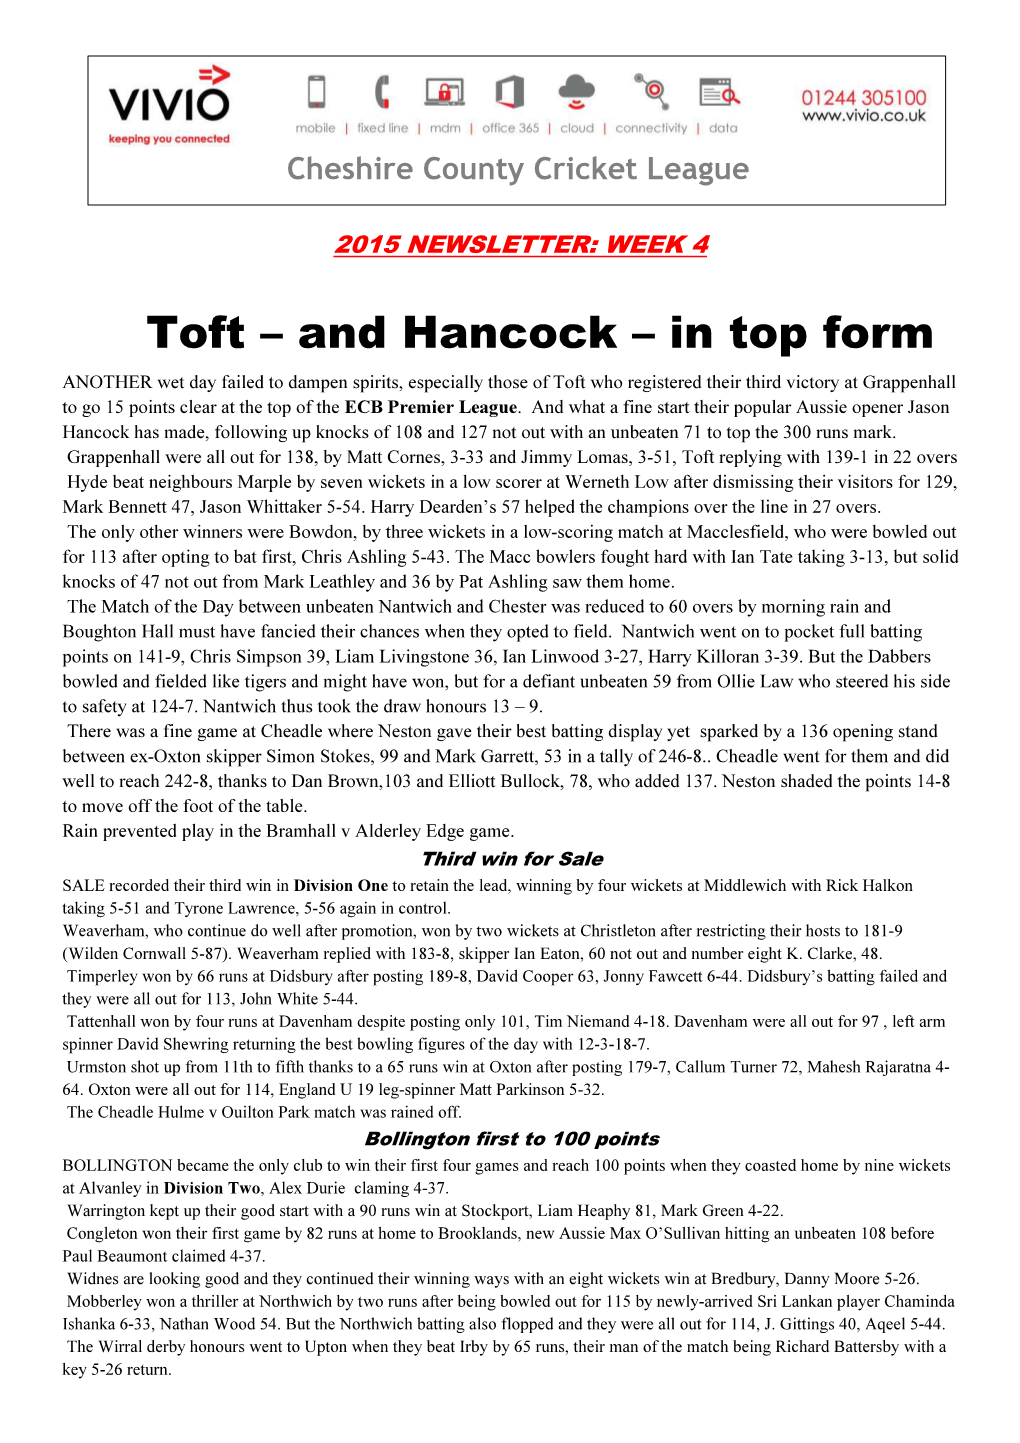 Toft – and Hancock – in Top Form